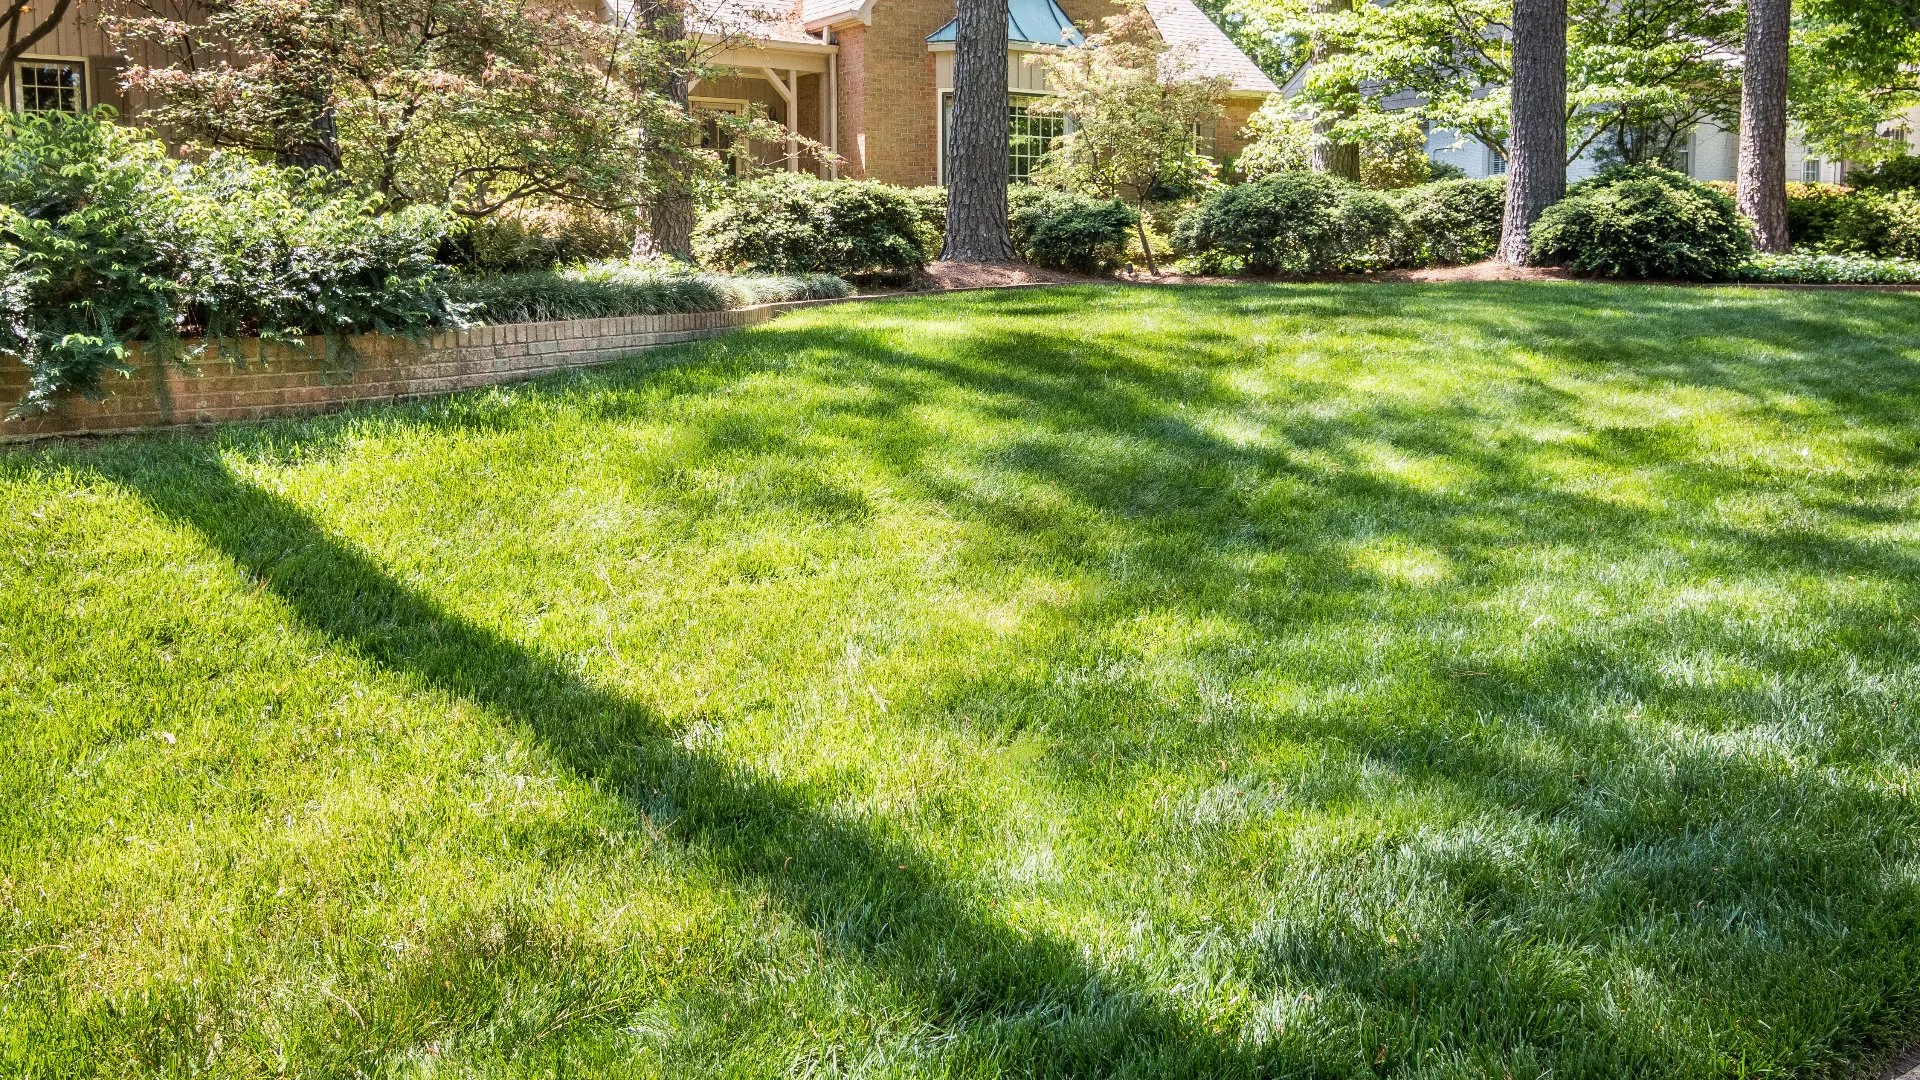 Applying Too Much Fertilizer to Your Lawn Can Do More Harm Than Good!